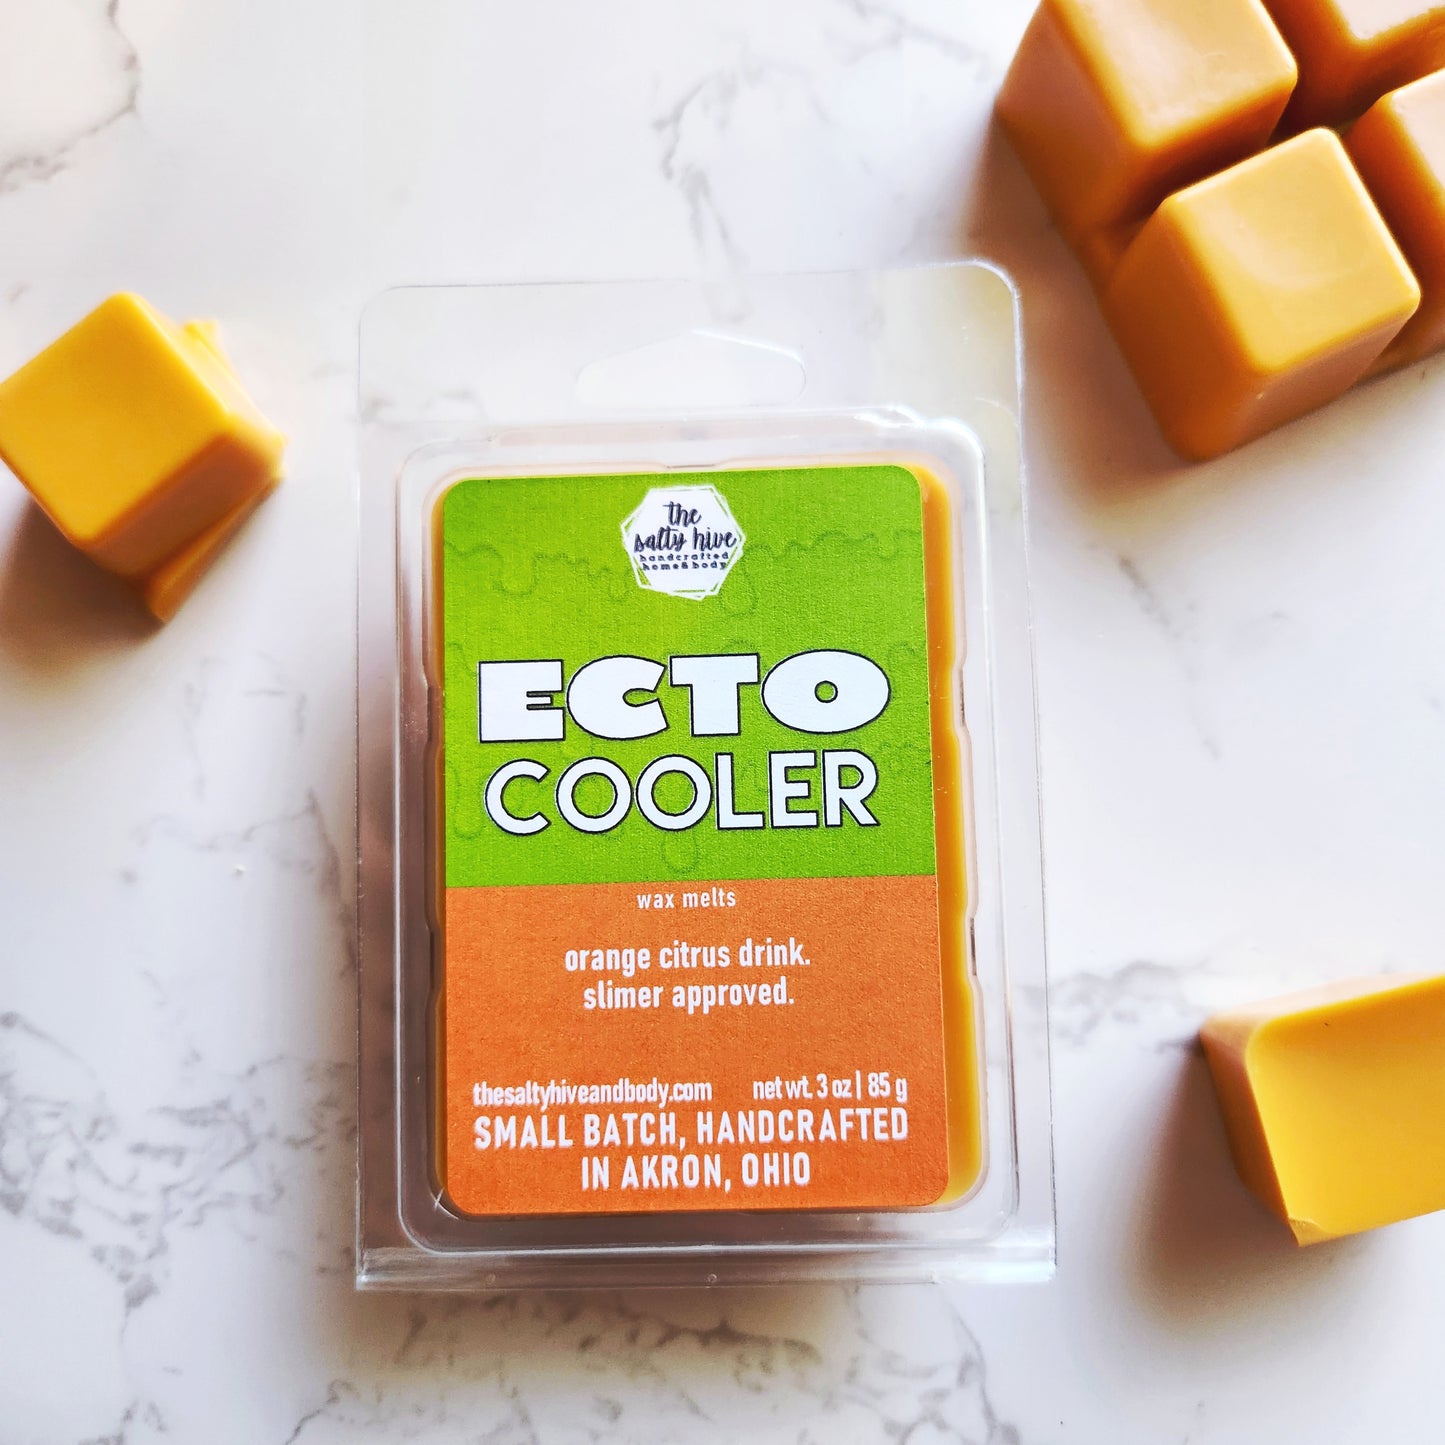 ecto cooler wax melts - the salty hive